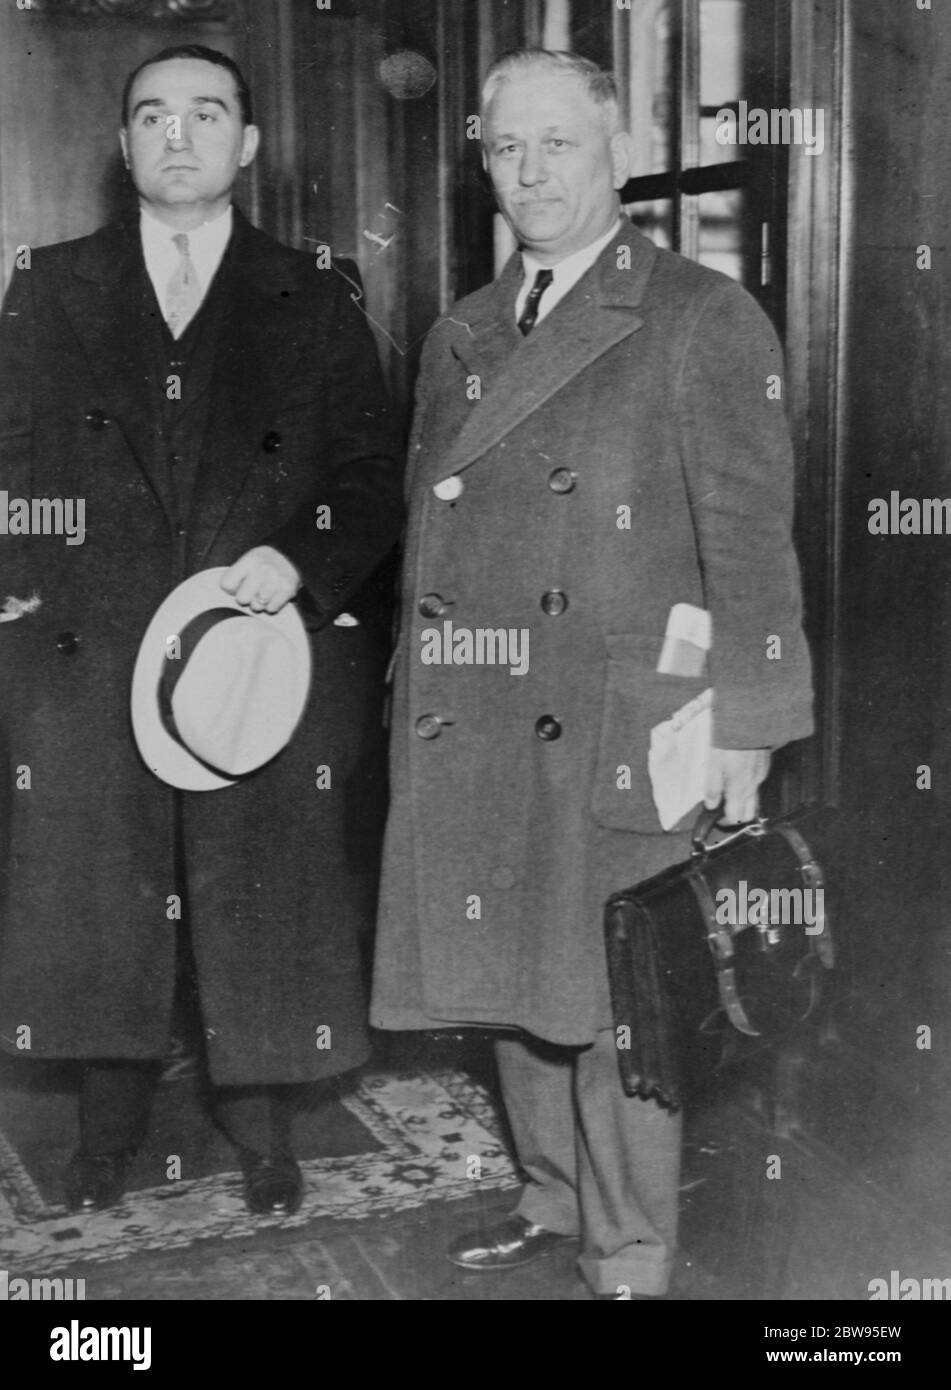 US despatches officers to bring back Insull . C A Bellows and A J Vlaches Illinois officers as they sailed aboard the Italian liner Roma with the intention of bringing Samuel Insull the Chicago financier back fromAthens where he has taken refuge . 10 November 1932 Stock Photo